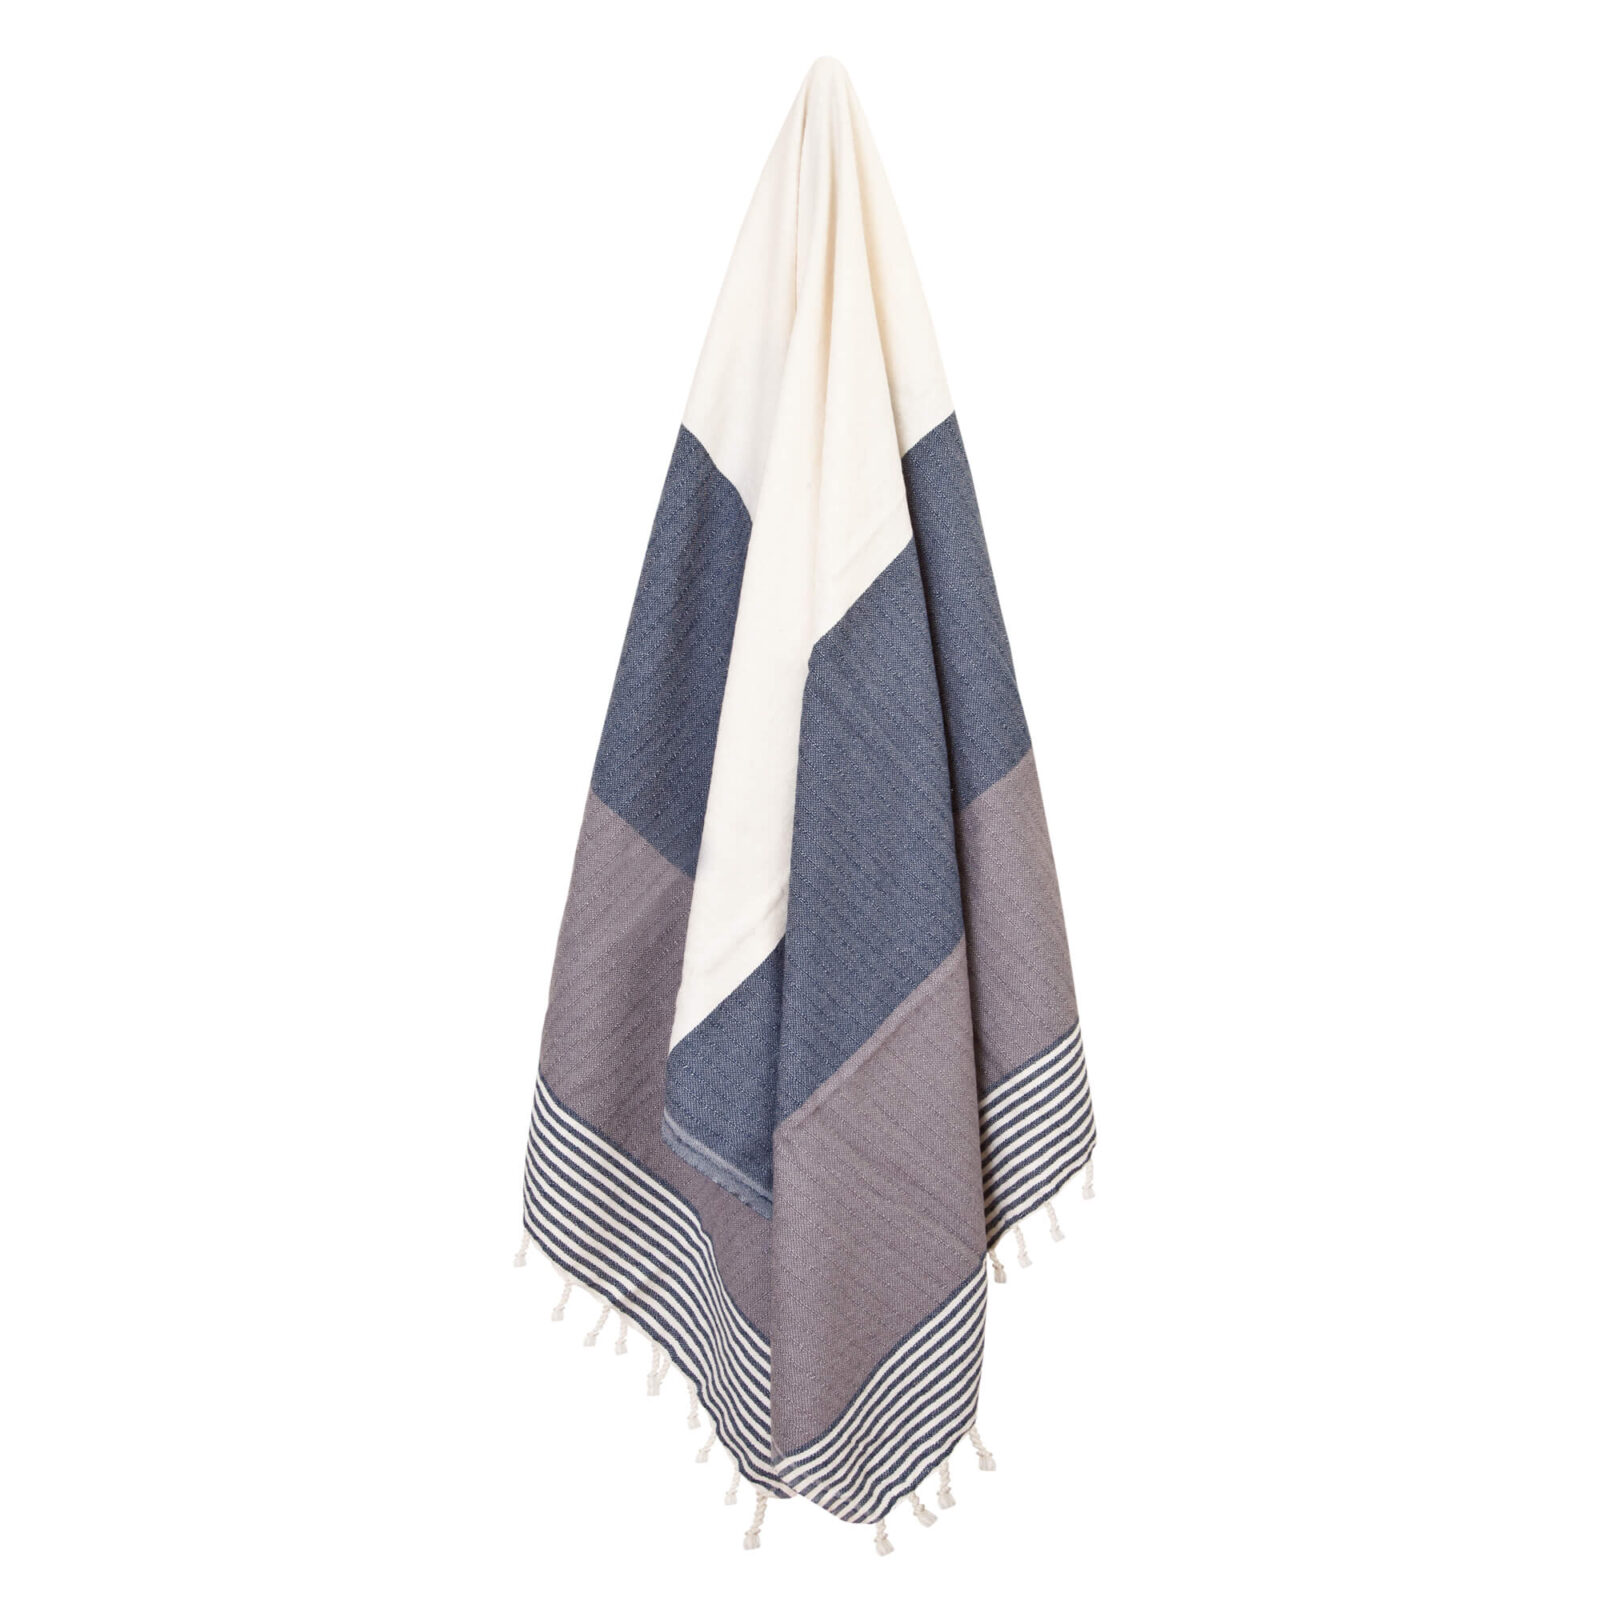 3 COLOR LUXURY TURKISH TOWEL - Turkish Towels for Beach and Bath ...